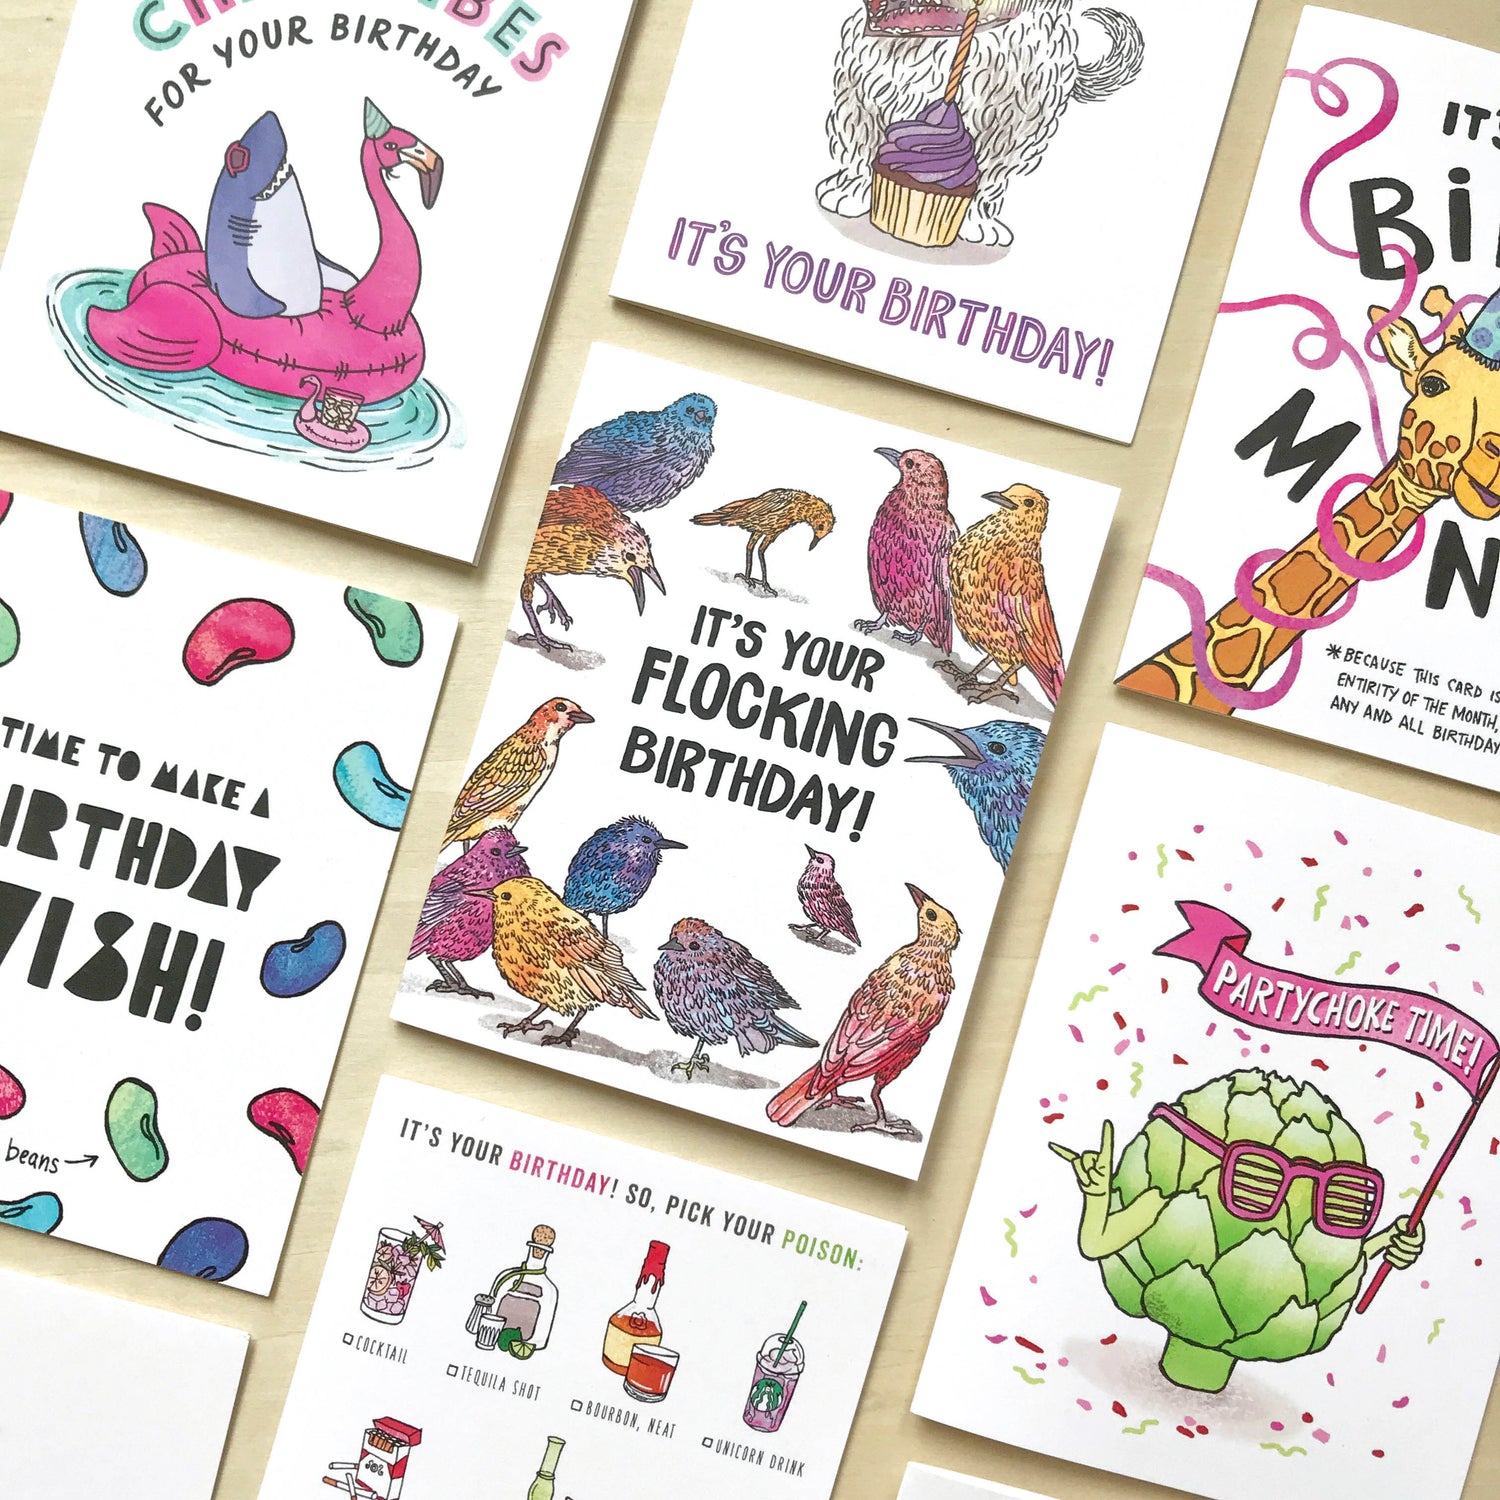 illustrated birthday cards with animals and puns